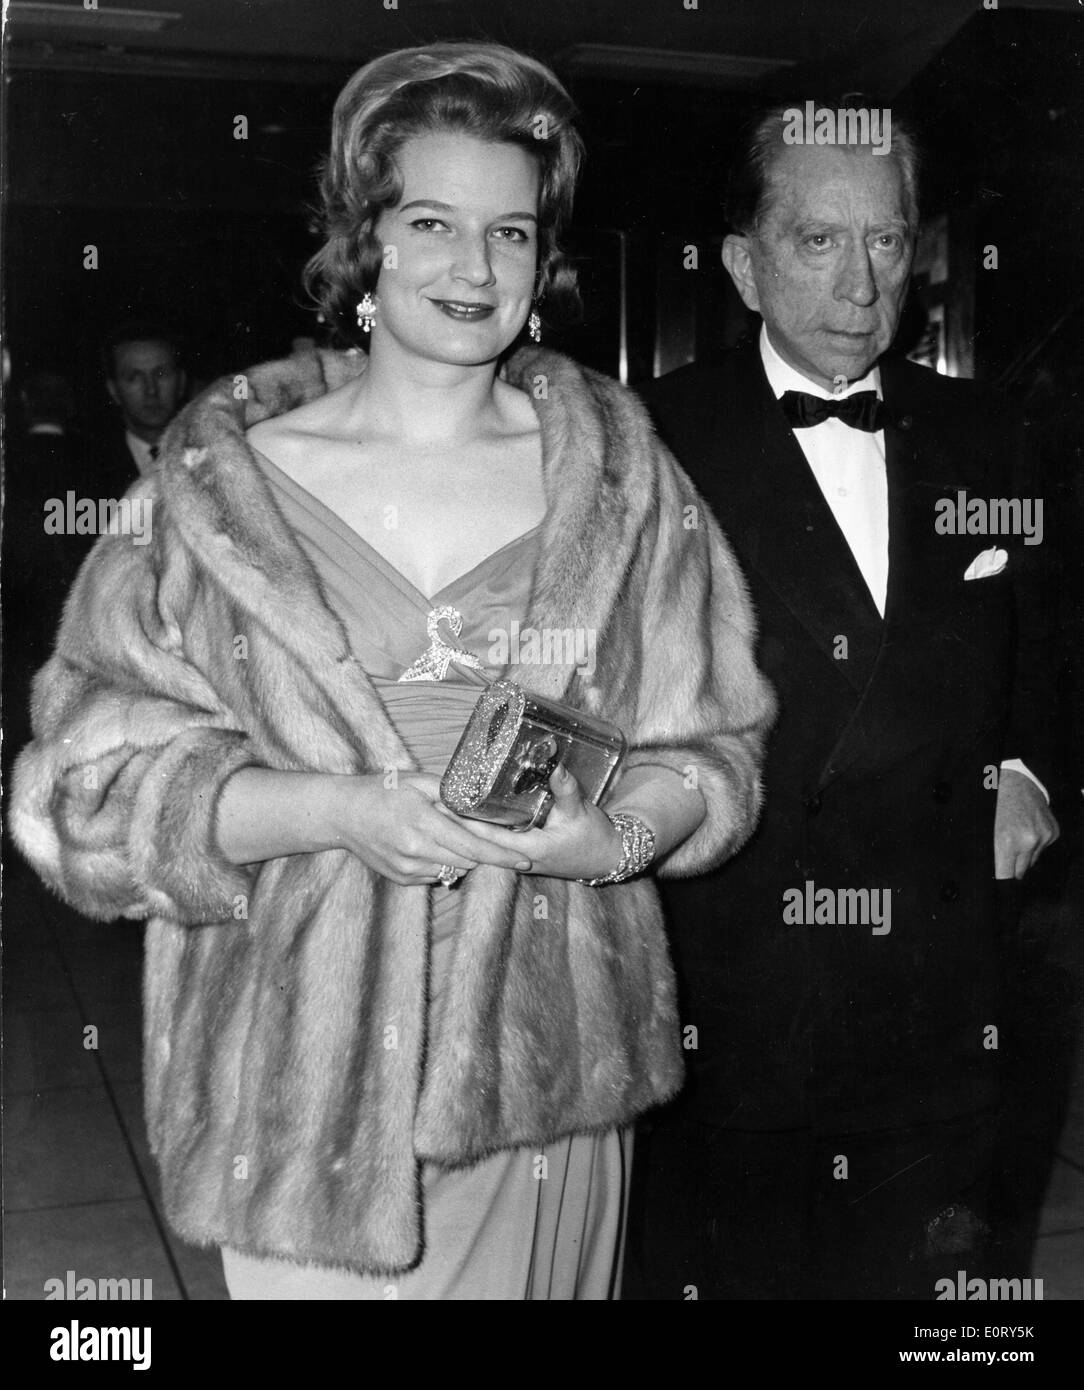 Industrialist J. Paul Getty at party with wife Stock Photo